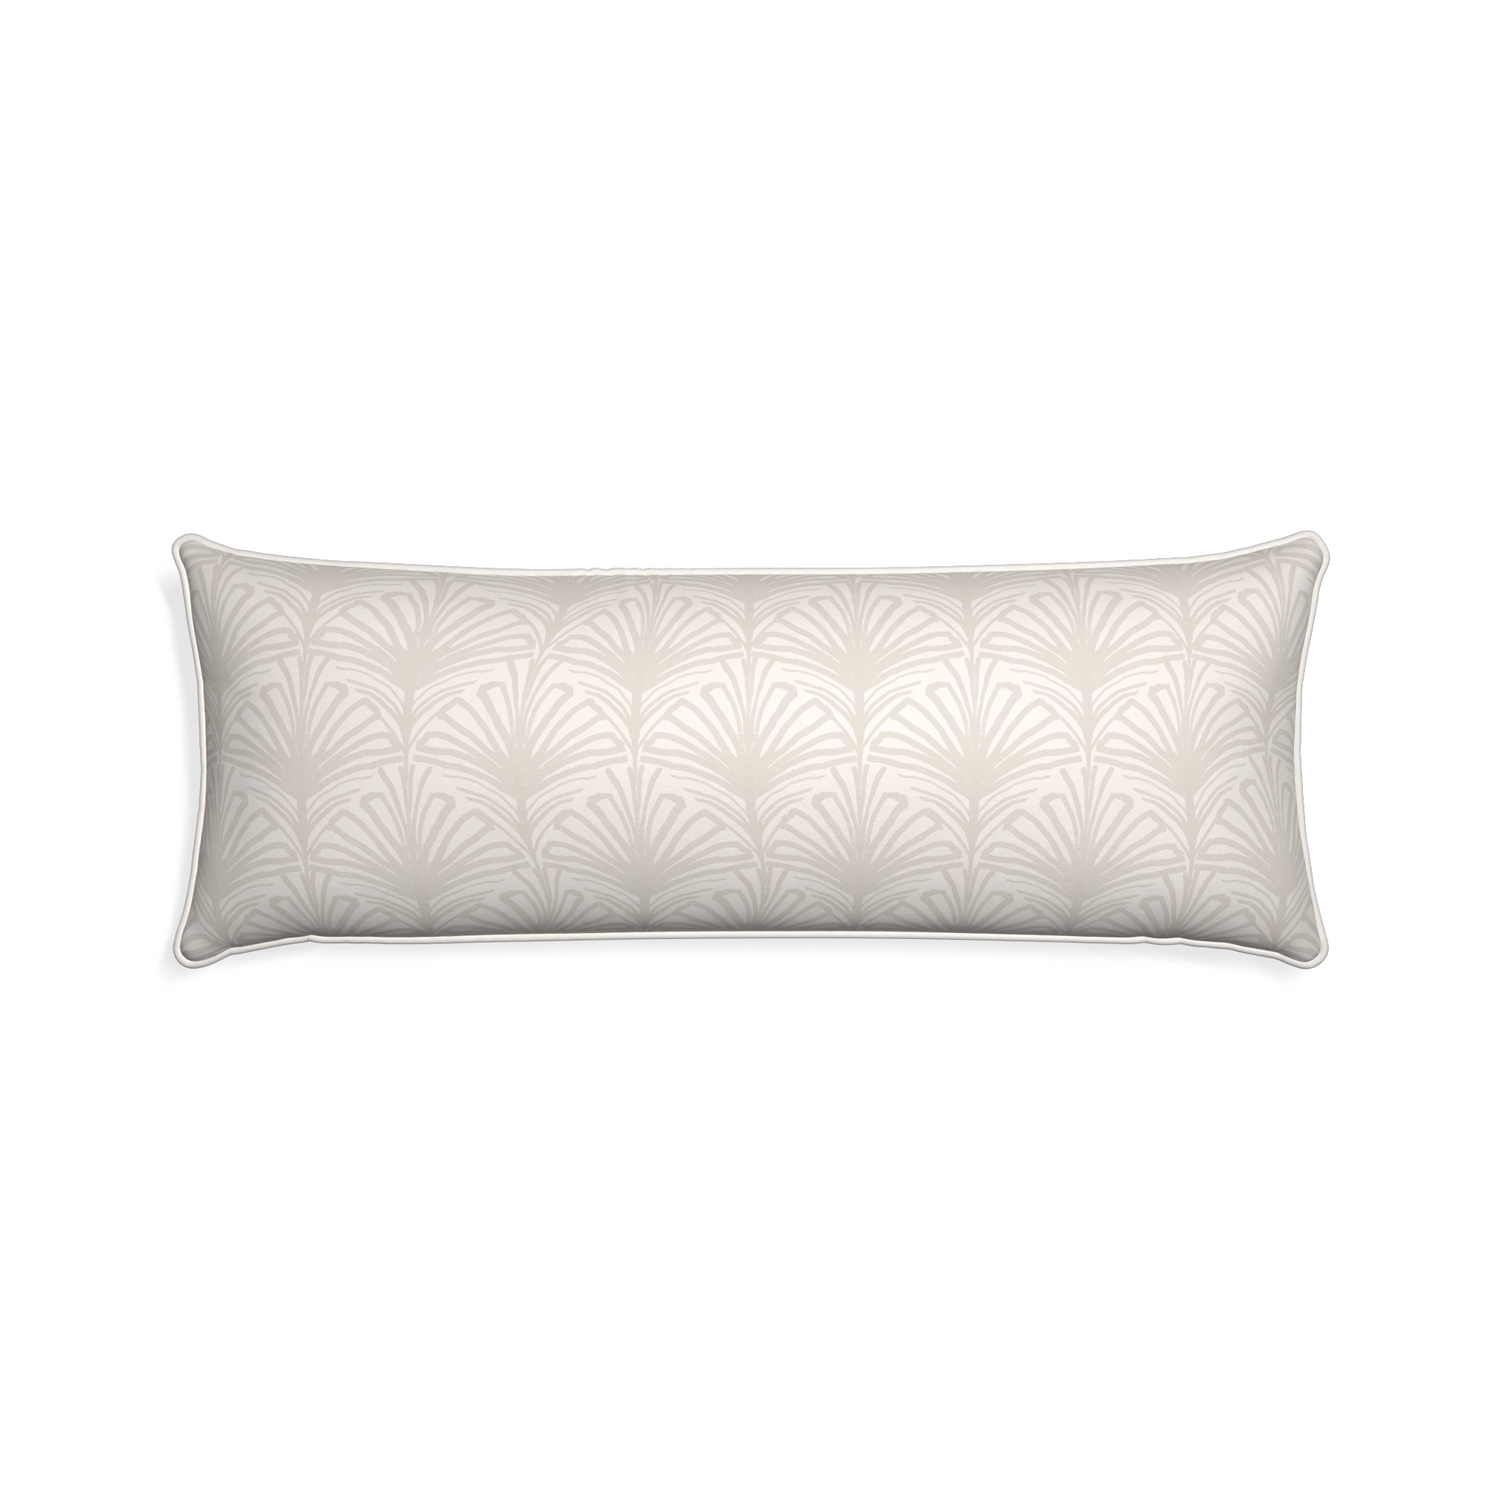 Xl-lumbar suzy sand custom beige palmpillow with snow piping on white background